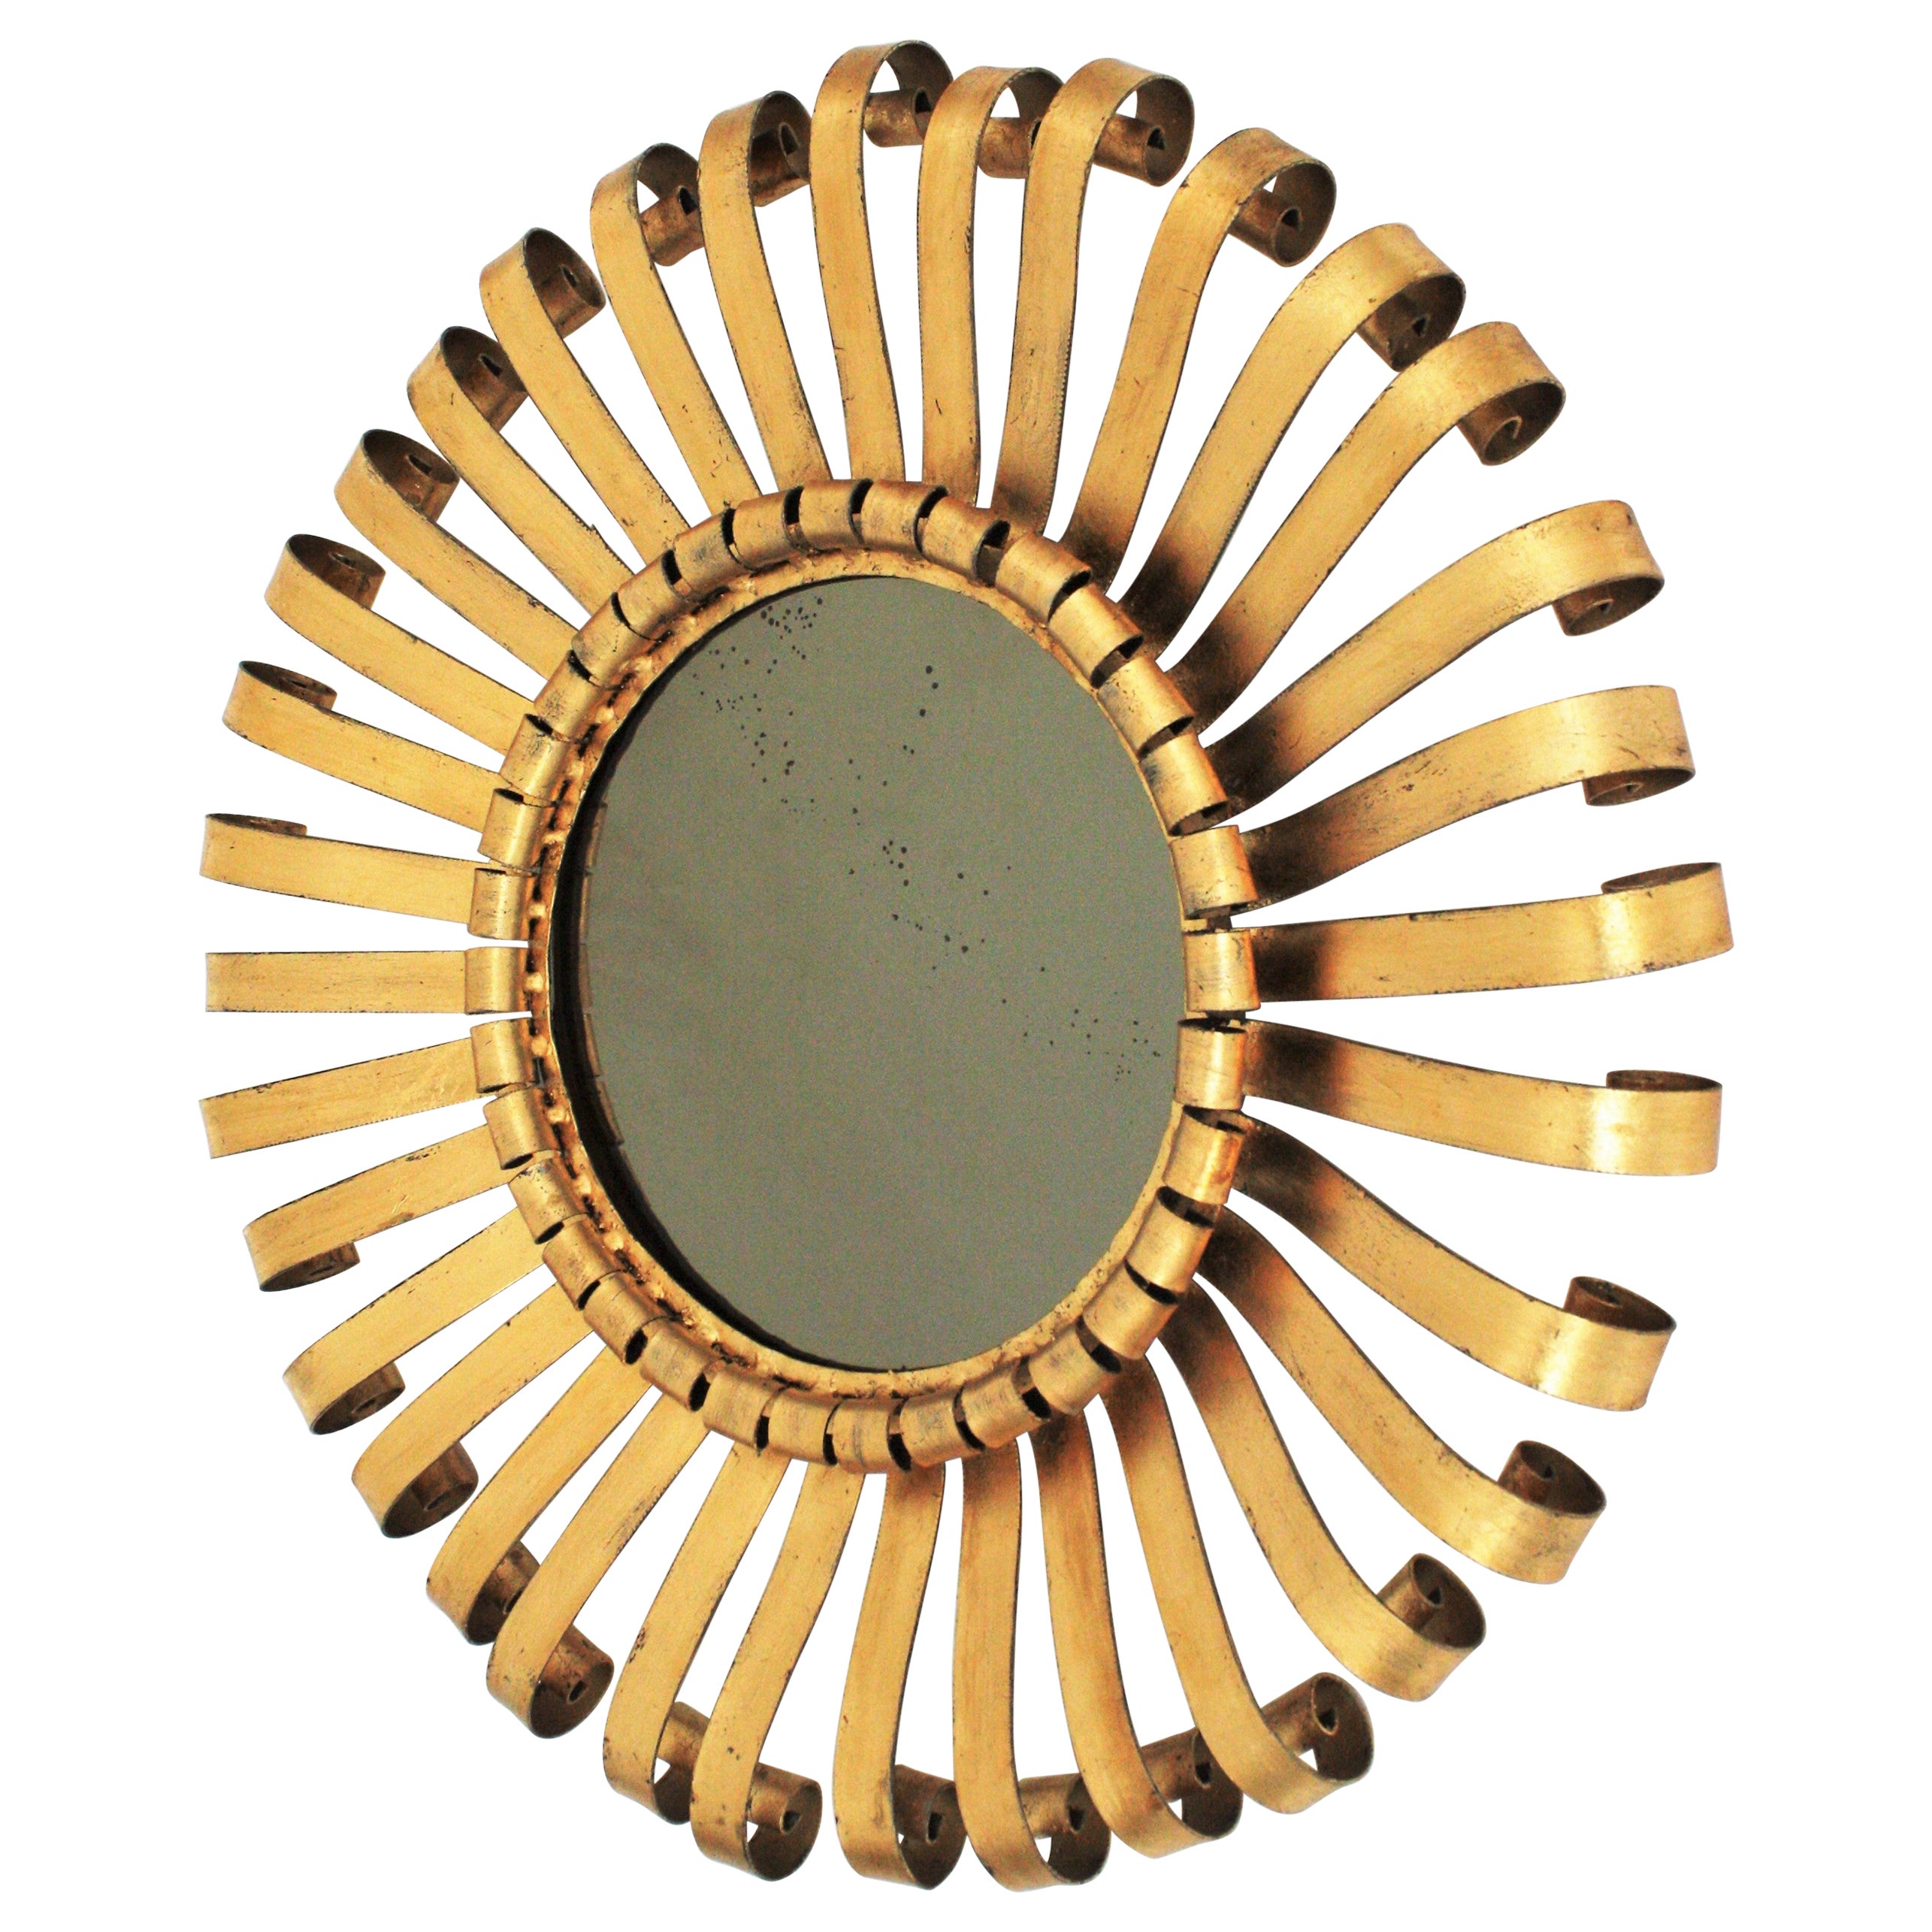 Brutalist scroll work wrought iron sunburst mirror, Spain, 1960s.
This handcrafted iron mirror has a hand forged iron structure with scroll ended beams finished in gold leaf gilding. A master piece entirely made by hand. 
It will be beautiful placed